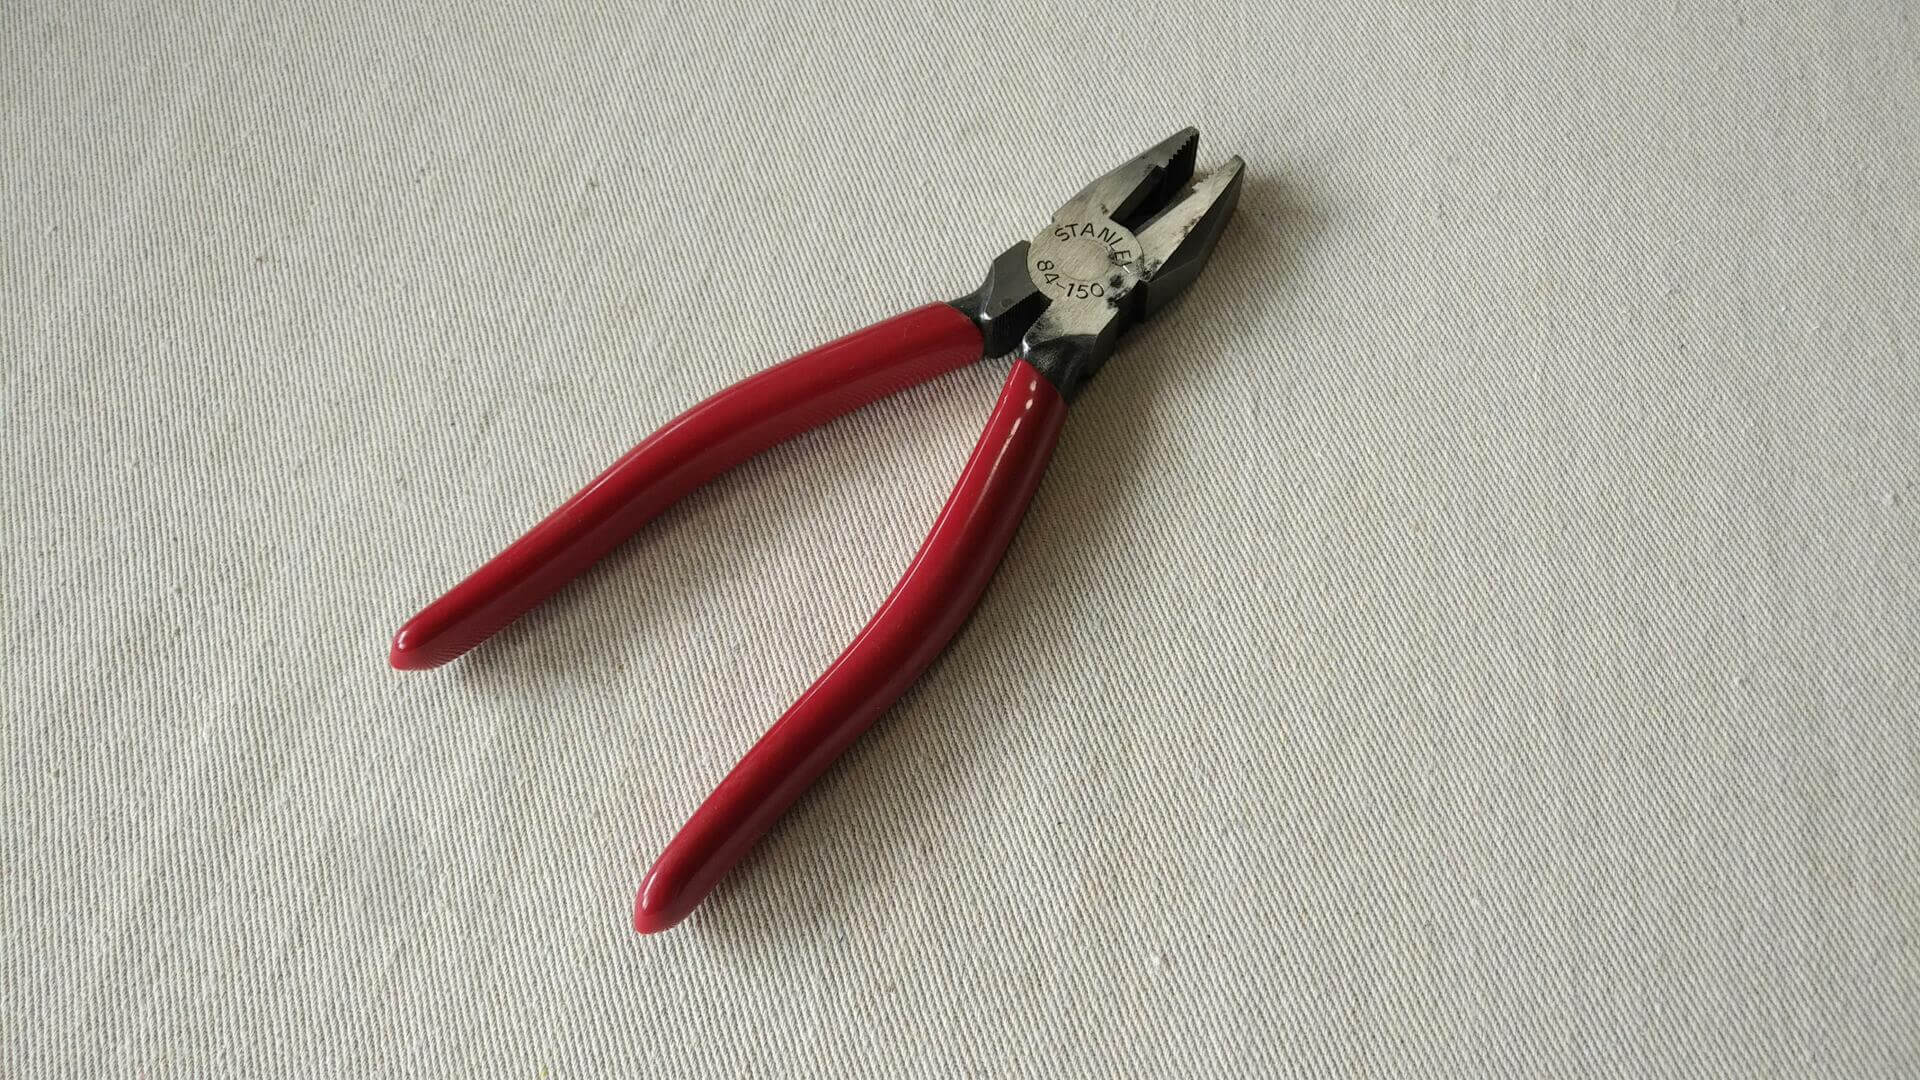 Nice pair of Stanley 84-150 lineman's combination pliers cutters with red insulated handles 7 1/2 inches long. Vintage made in Japan collectible electrician gripping and cutting hand tools